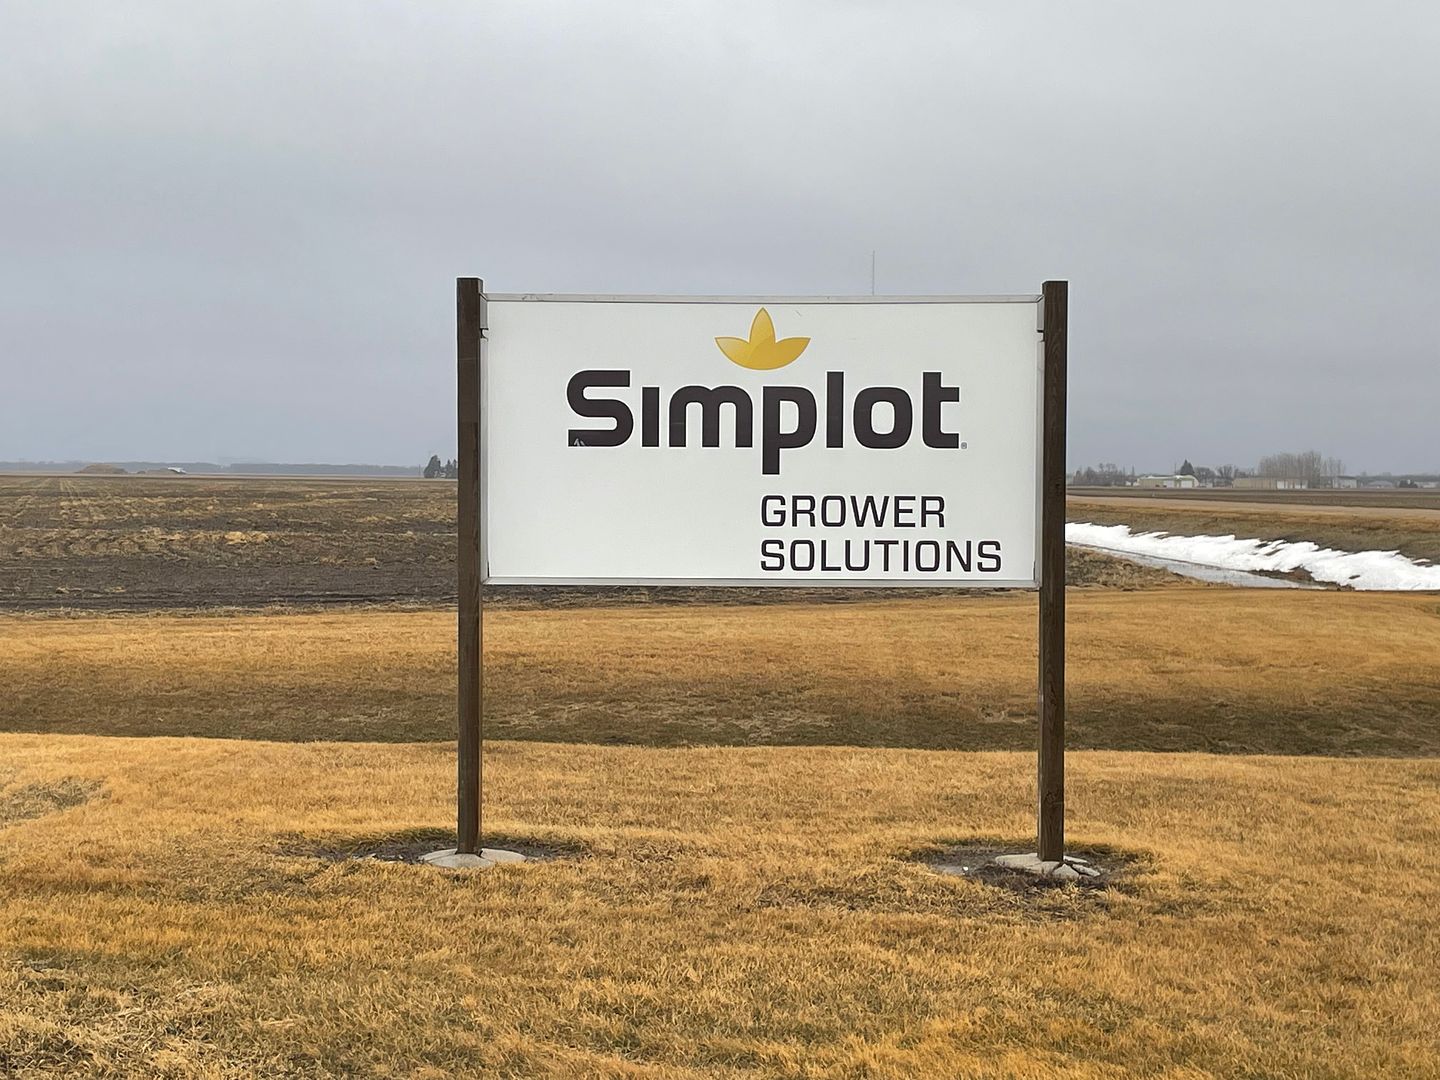 Moorhead Fertilizer & Agricultural Seed Supplies | Simplot Grower Solutions